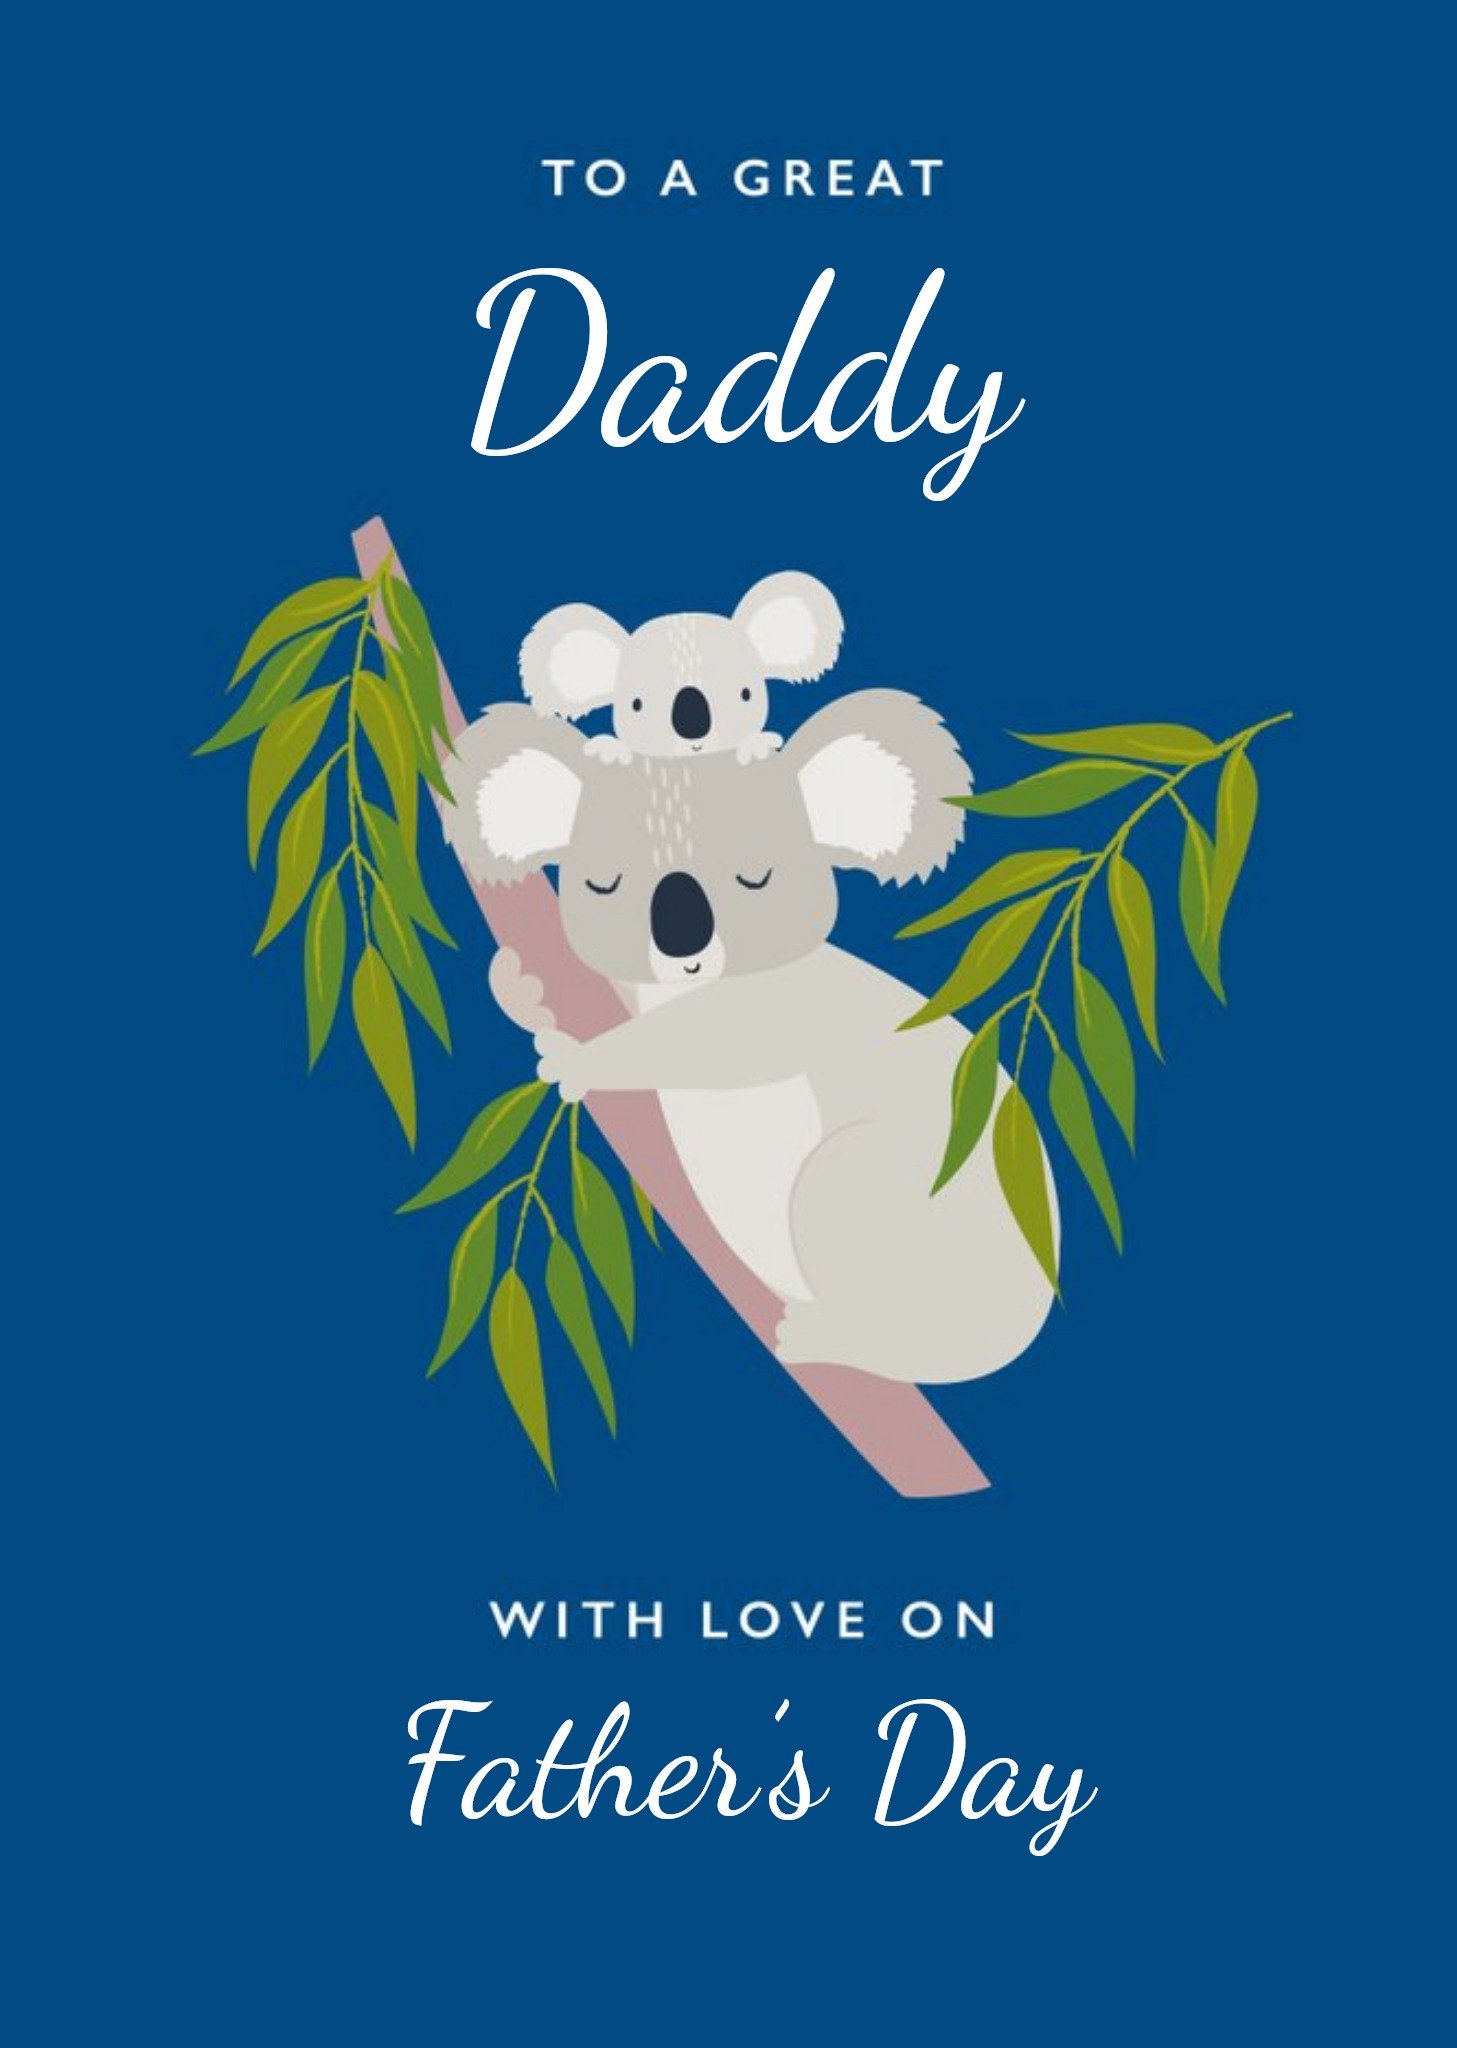 Moonpig Cute Illustration Of A Koala With A Joey On A Blue Background Father's Day Card Ecard